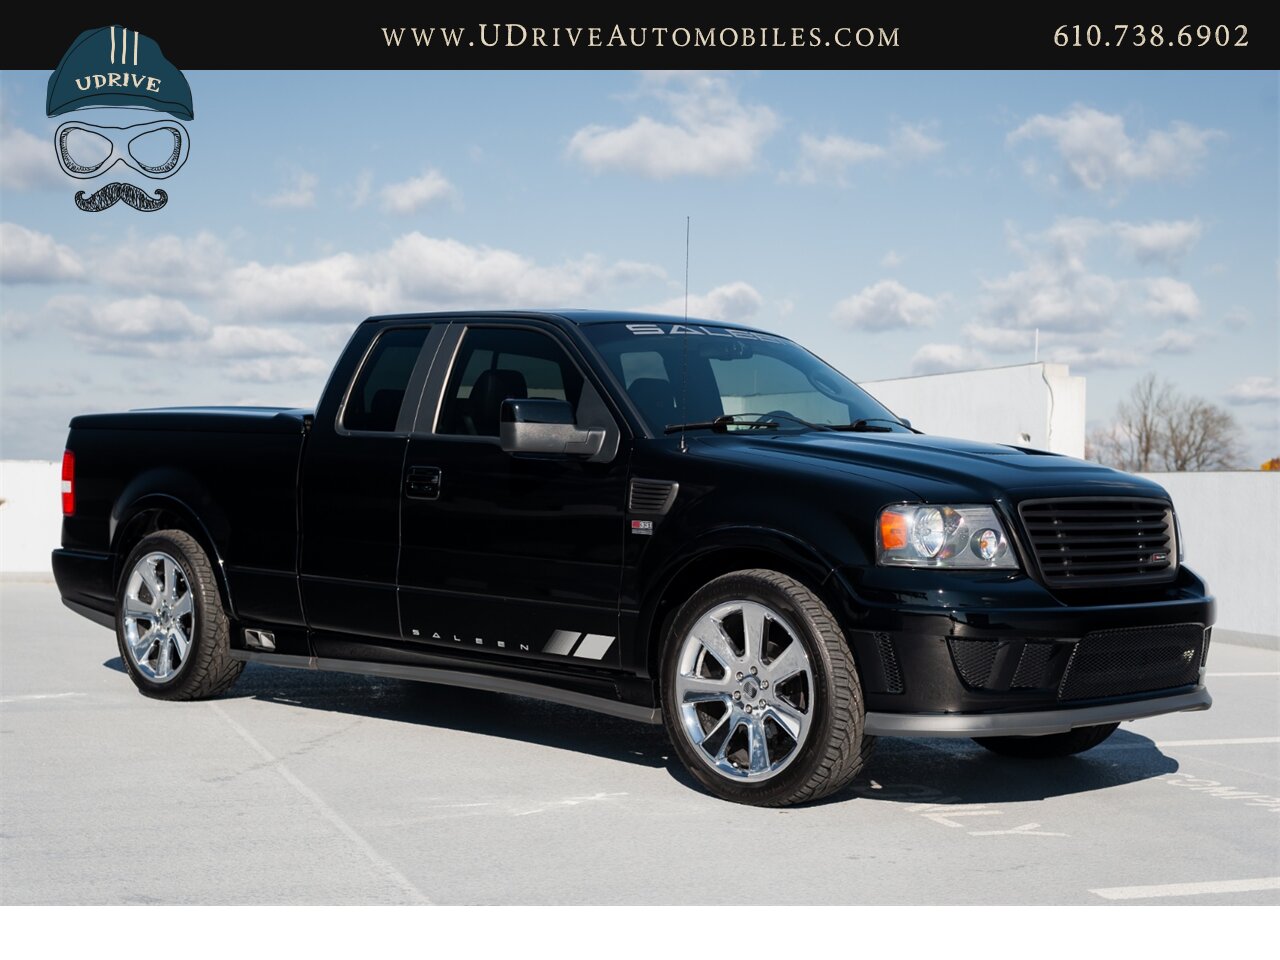 2007 Ford F-150 Saleen S331 Supercharged #60 13k Miles 450HP   - Photo 15 - West Chester, PA 19382